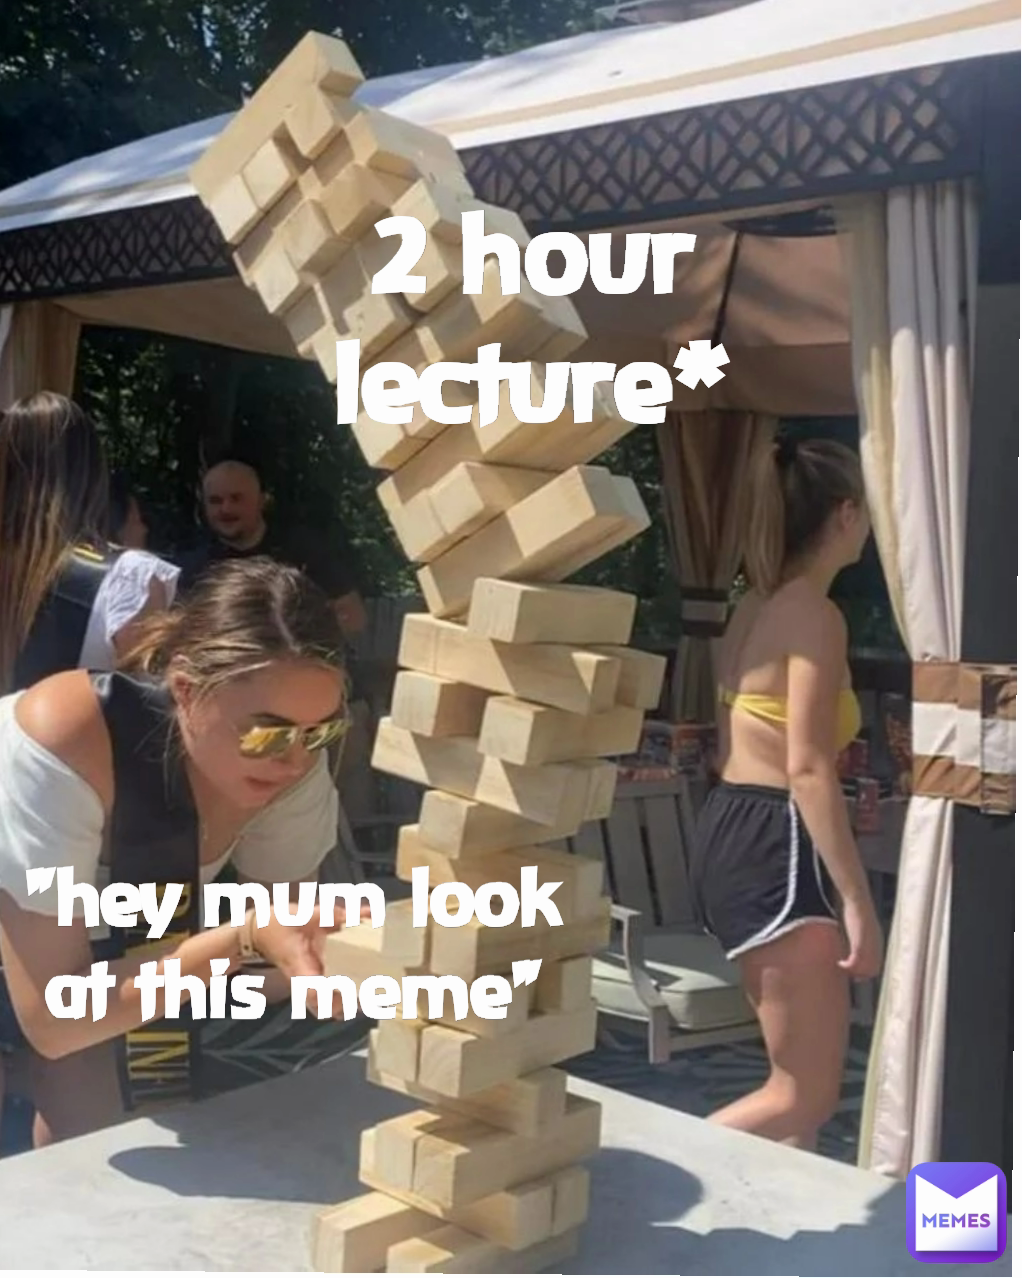 2 hour lecture*
 "hey mum look at this meme"

